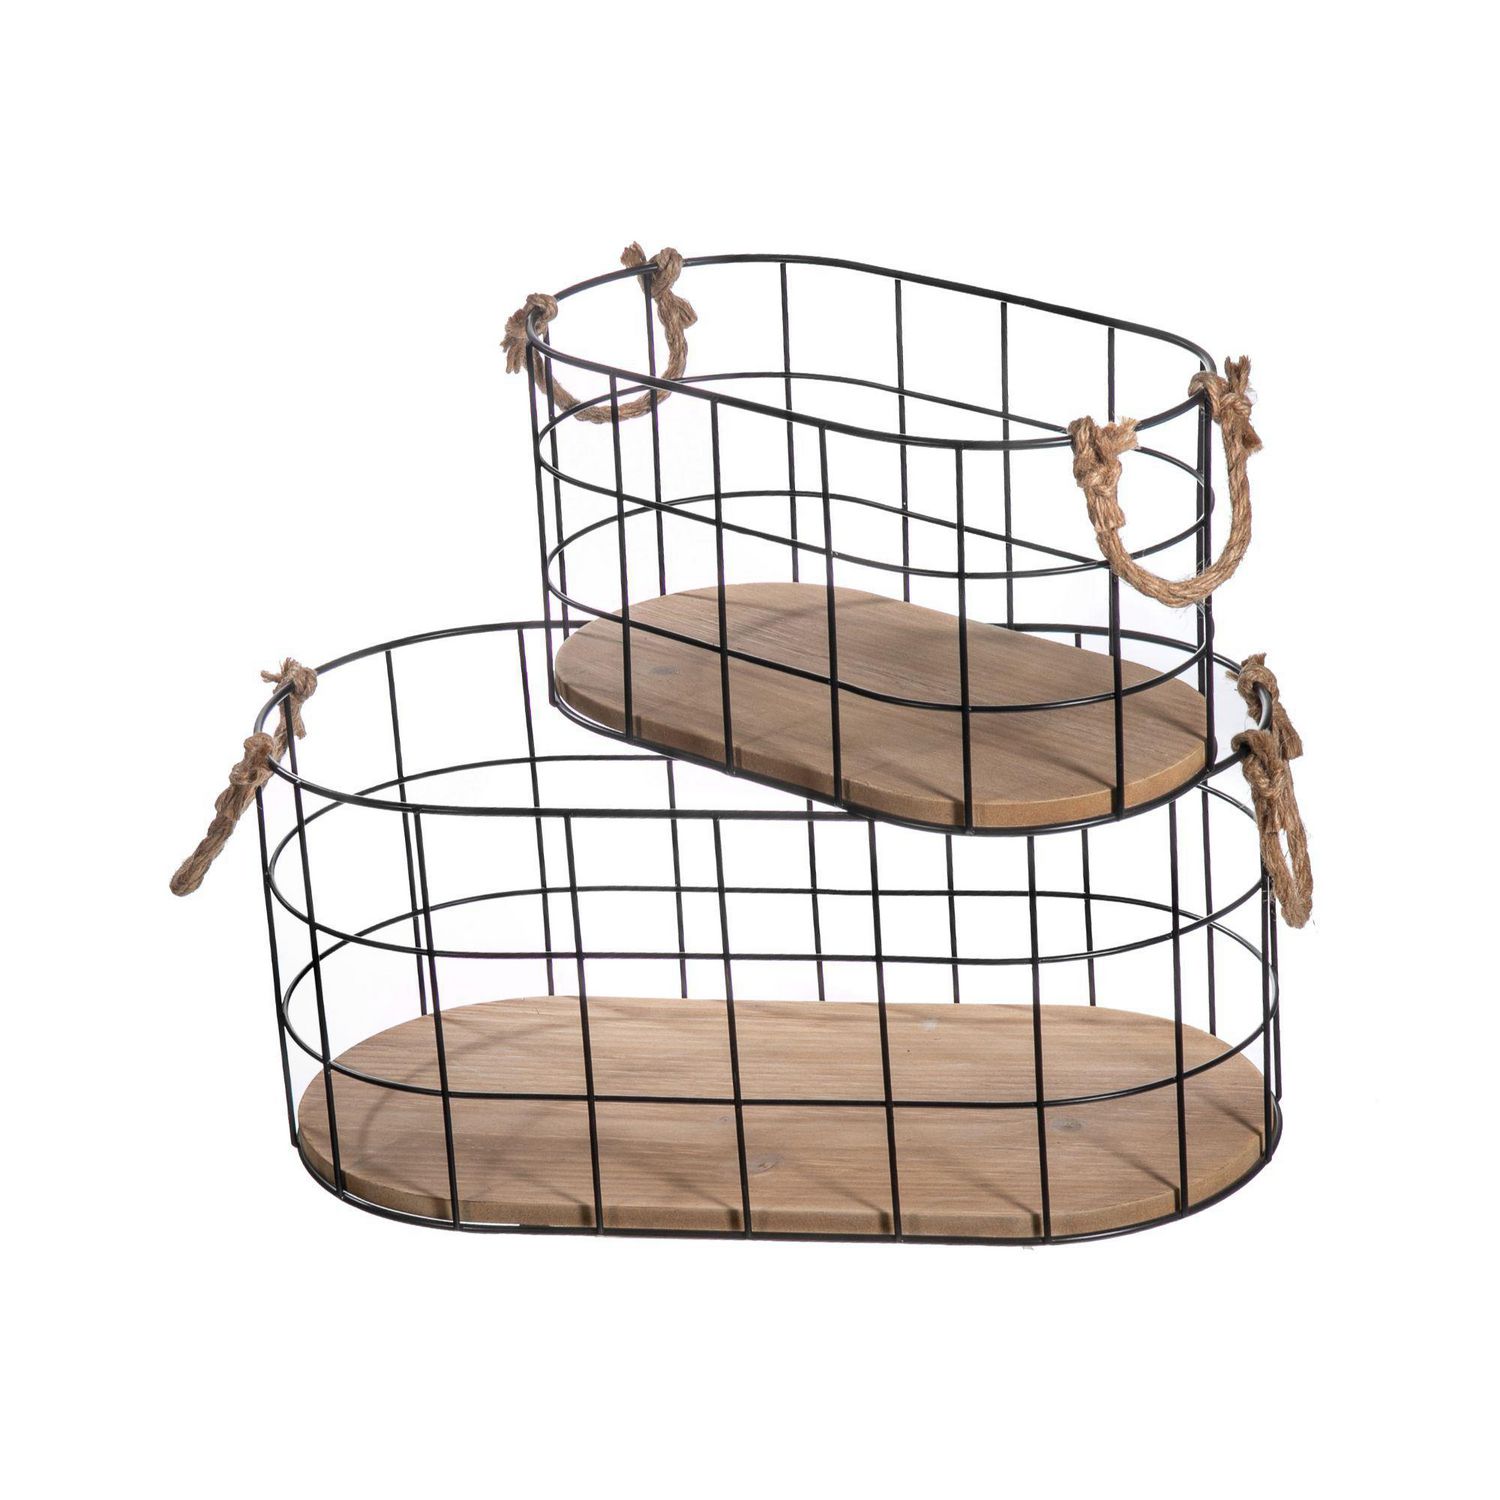 Wire Baskets w/Wood Handles Set of 2